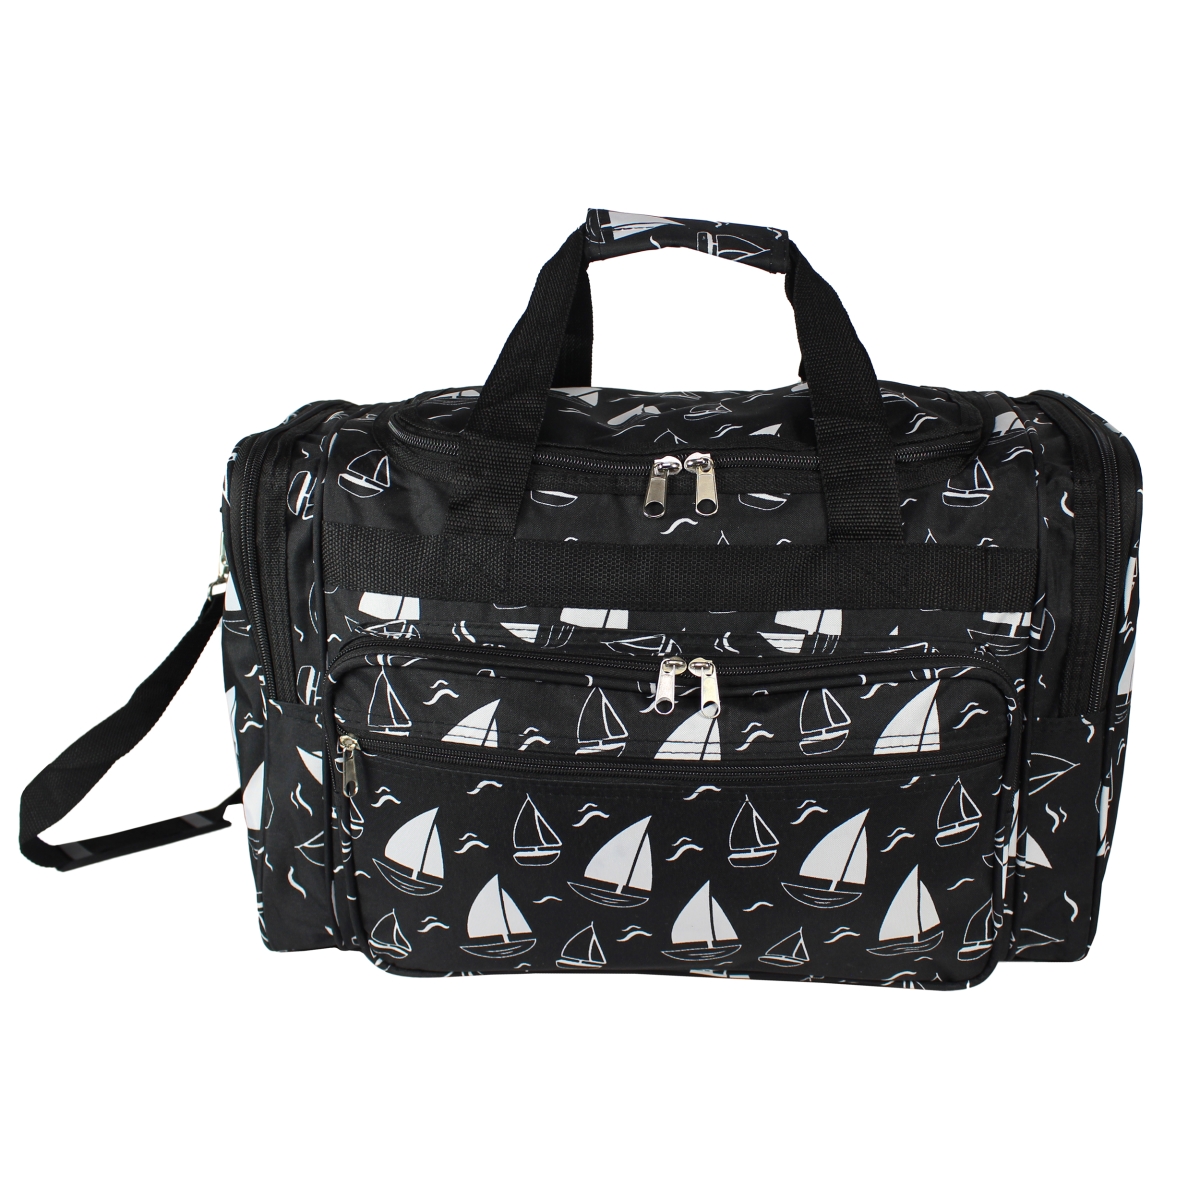 81t19-232 19 In. Carry-on Duffel Bag - Sailboat